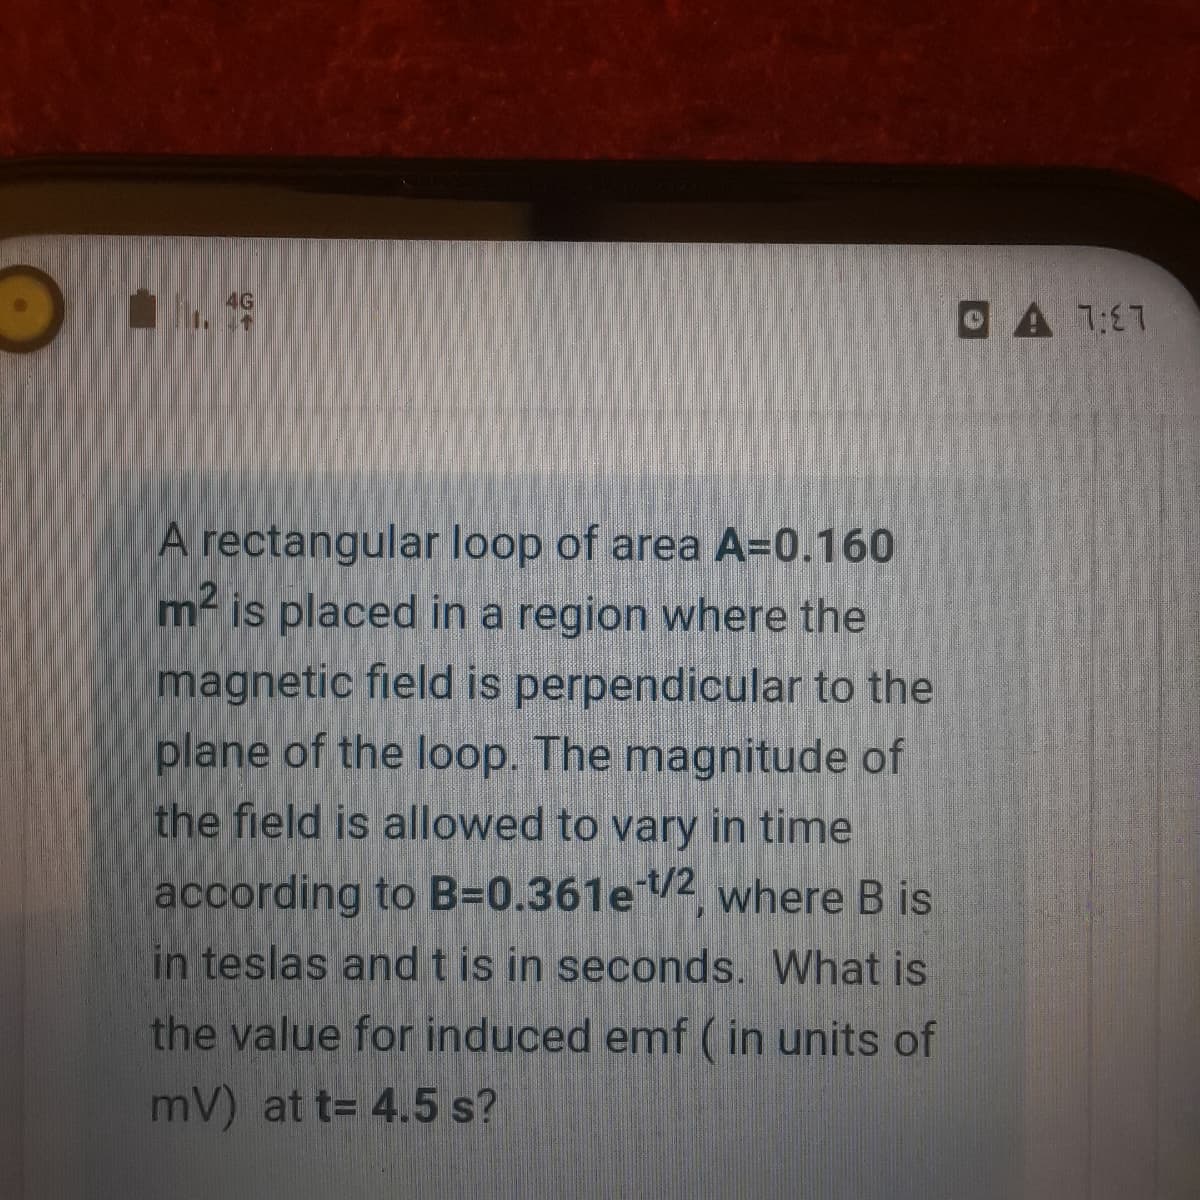 OA77
A rectangular loop of area A=0.160
m- is placed in a region where the
magnetic field is perpendicular to the
plane of the loop. The magnitude of
the field is allowed to vary in time
according to B=0.361e2, where B is
in teslas andt is in seconds. What is
the value for induced emf (in units of
mV) at t= 4.5 s?
